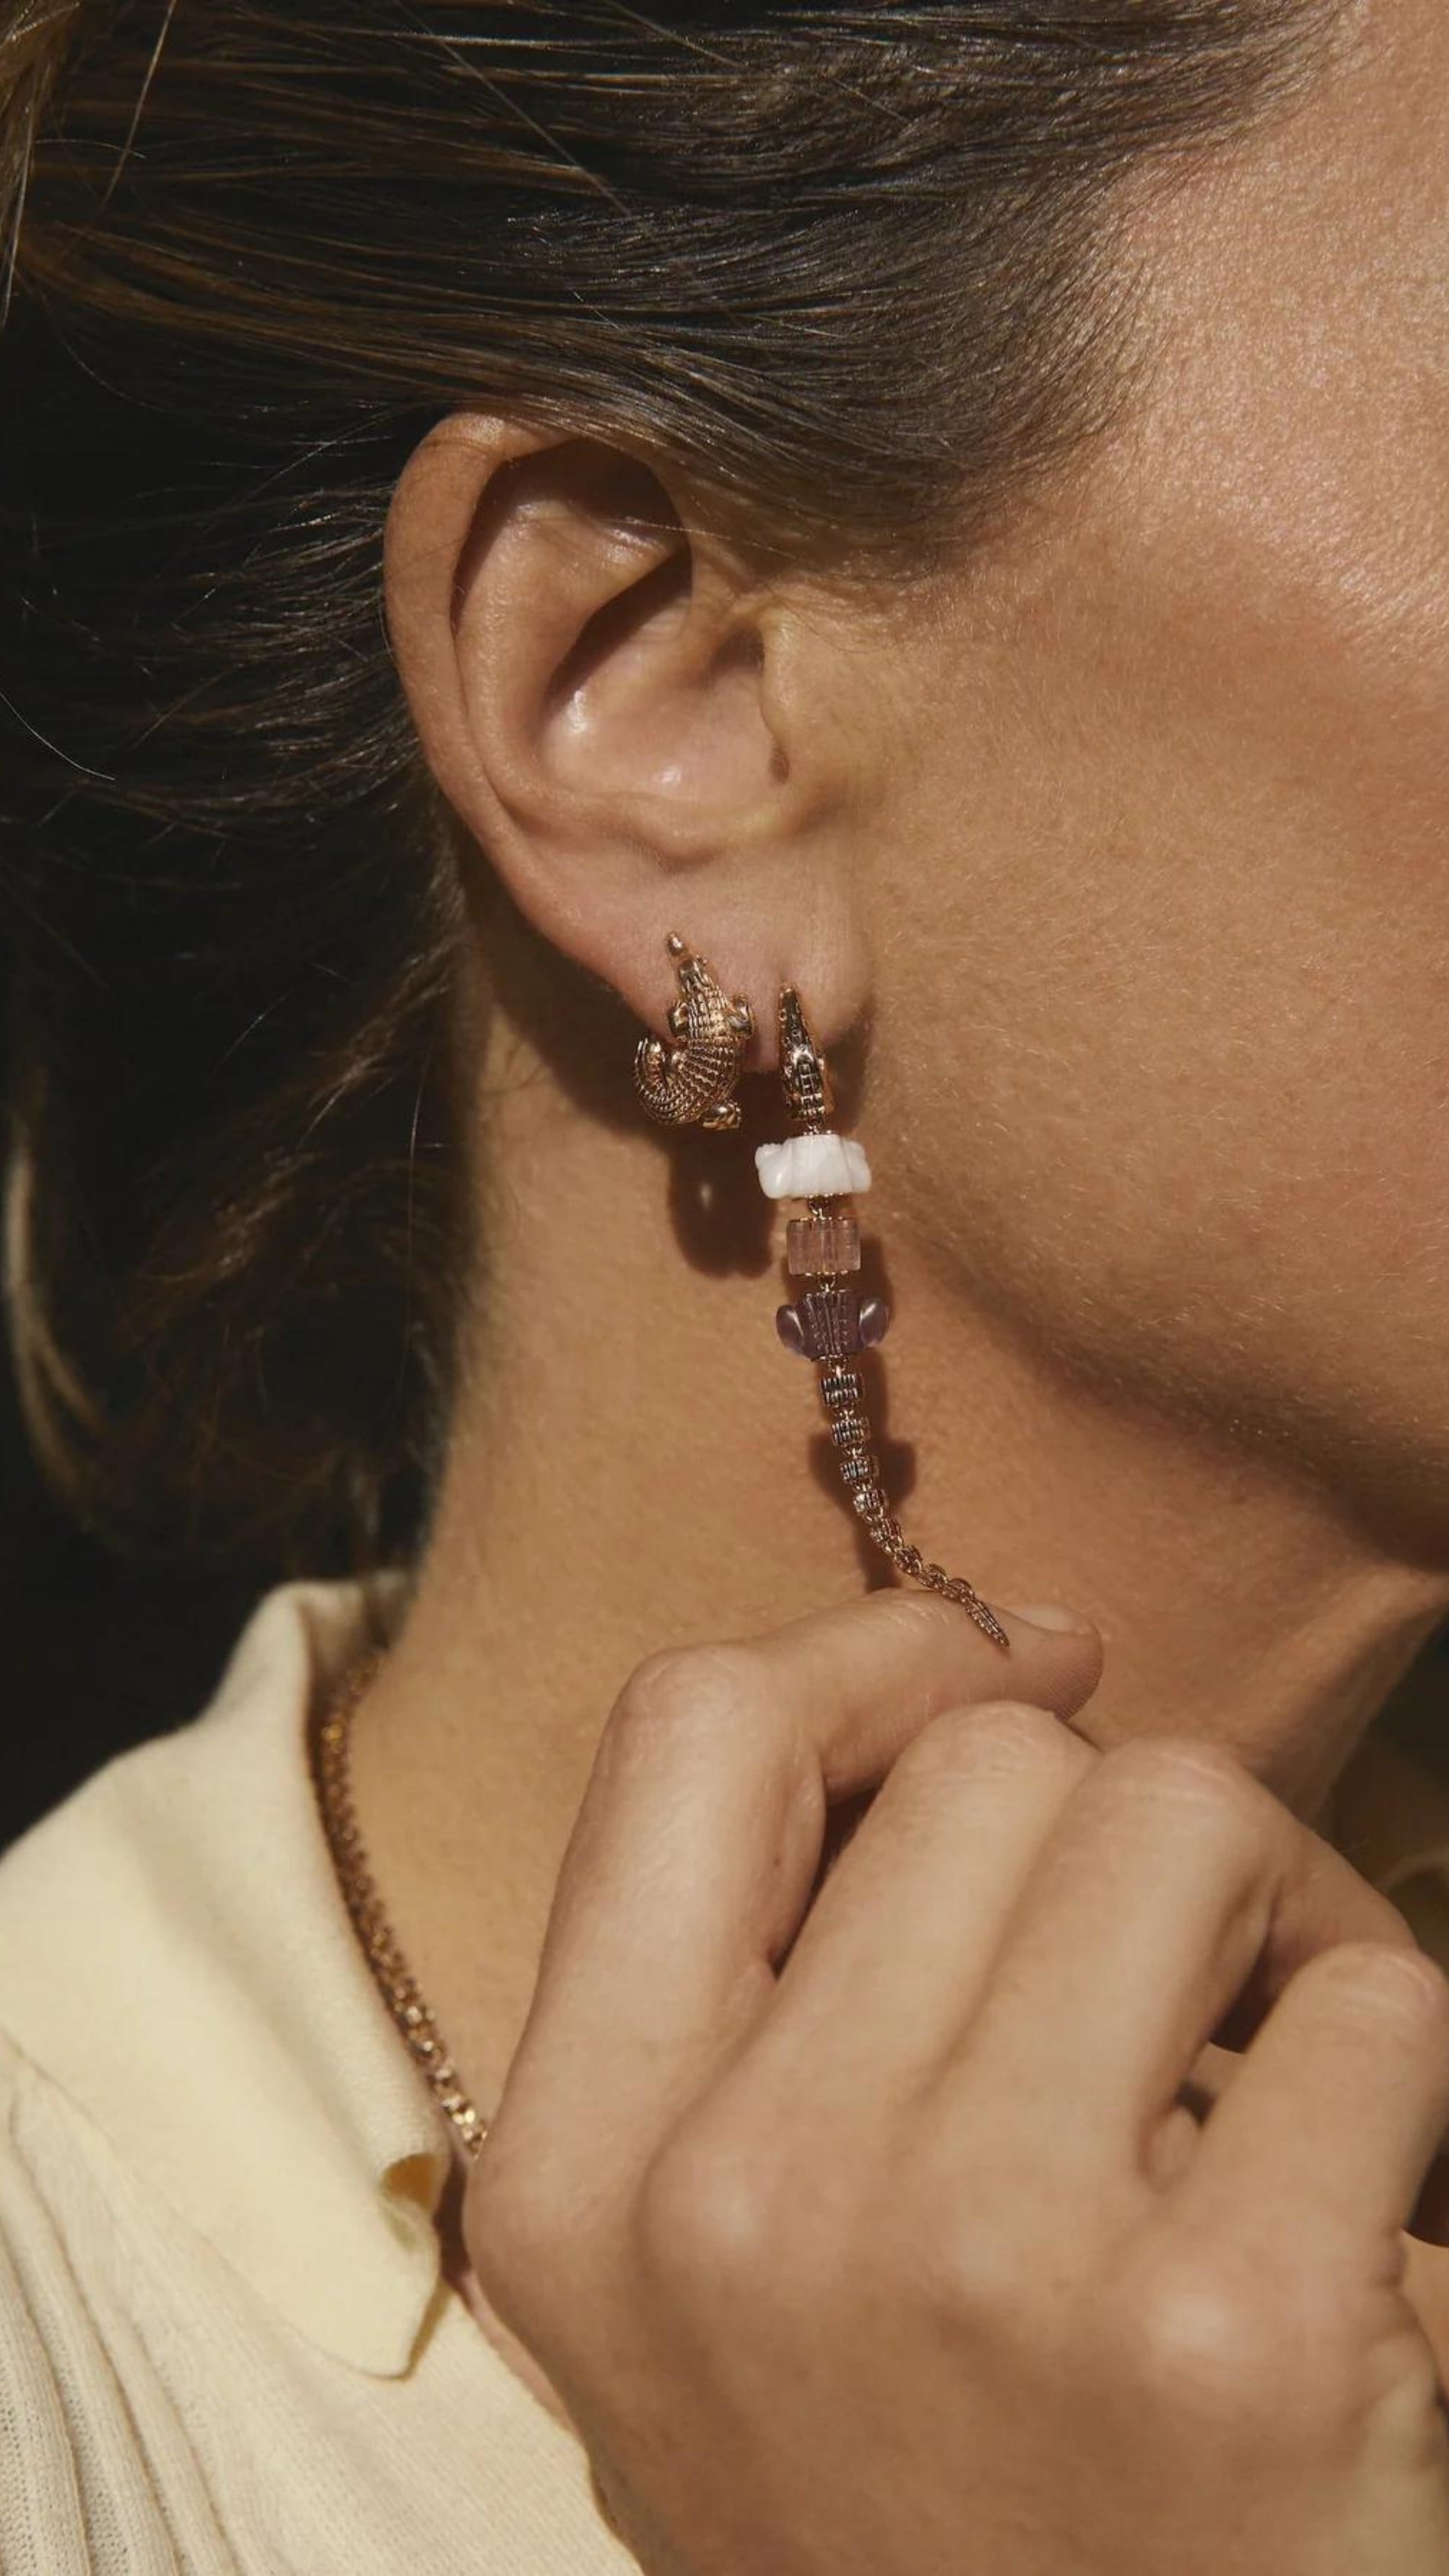 Bibi van der Velden Pink Gradient Alligator Vertebrae Bite Single Earring A single earring in the shape of an alligator made from 18K rose gold and rose quartz, amethyst, pink opal. It features sapphire eyes and the alligator body moves. Photo shows earring on a model.